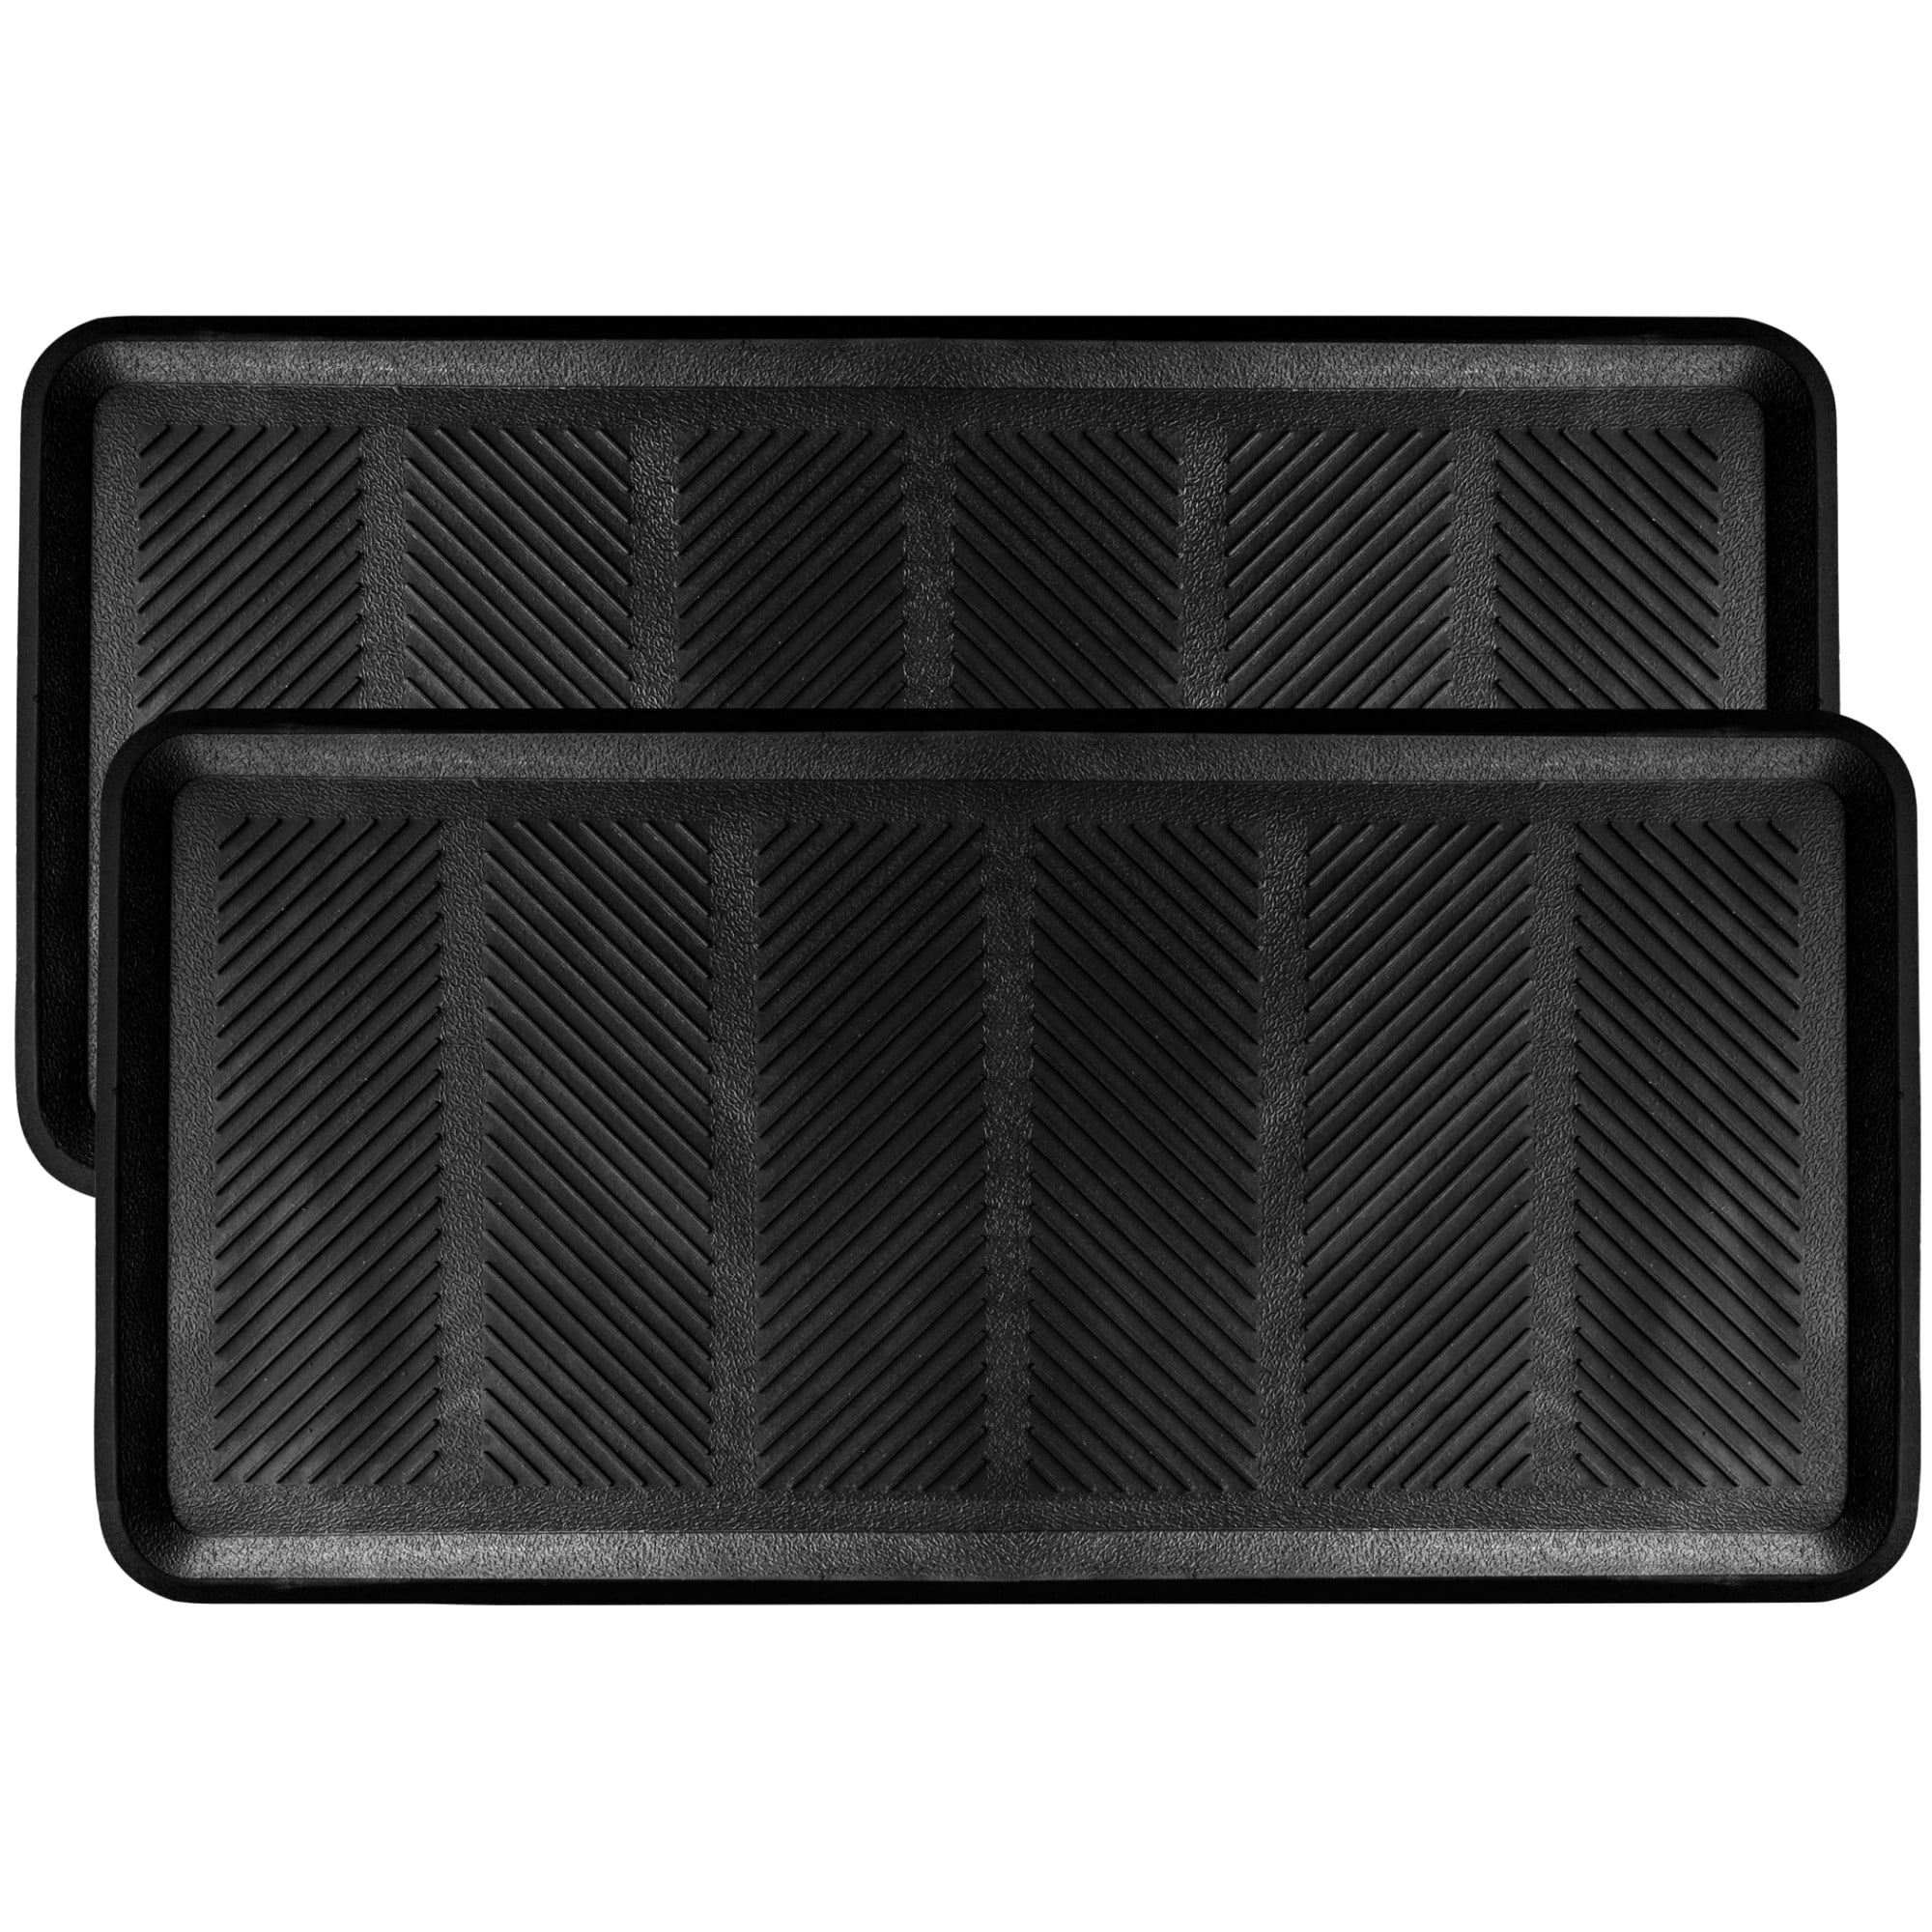 54102 Boot Tray Rubber, Black - 32 x 16 x 0.75 in -  Manakey Group